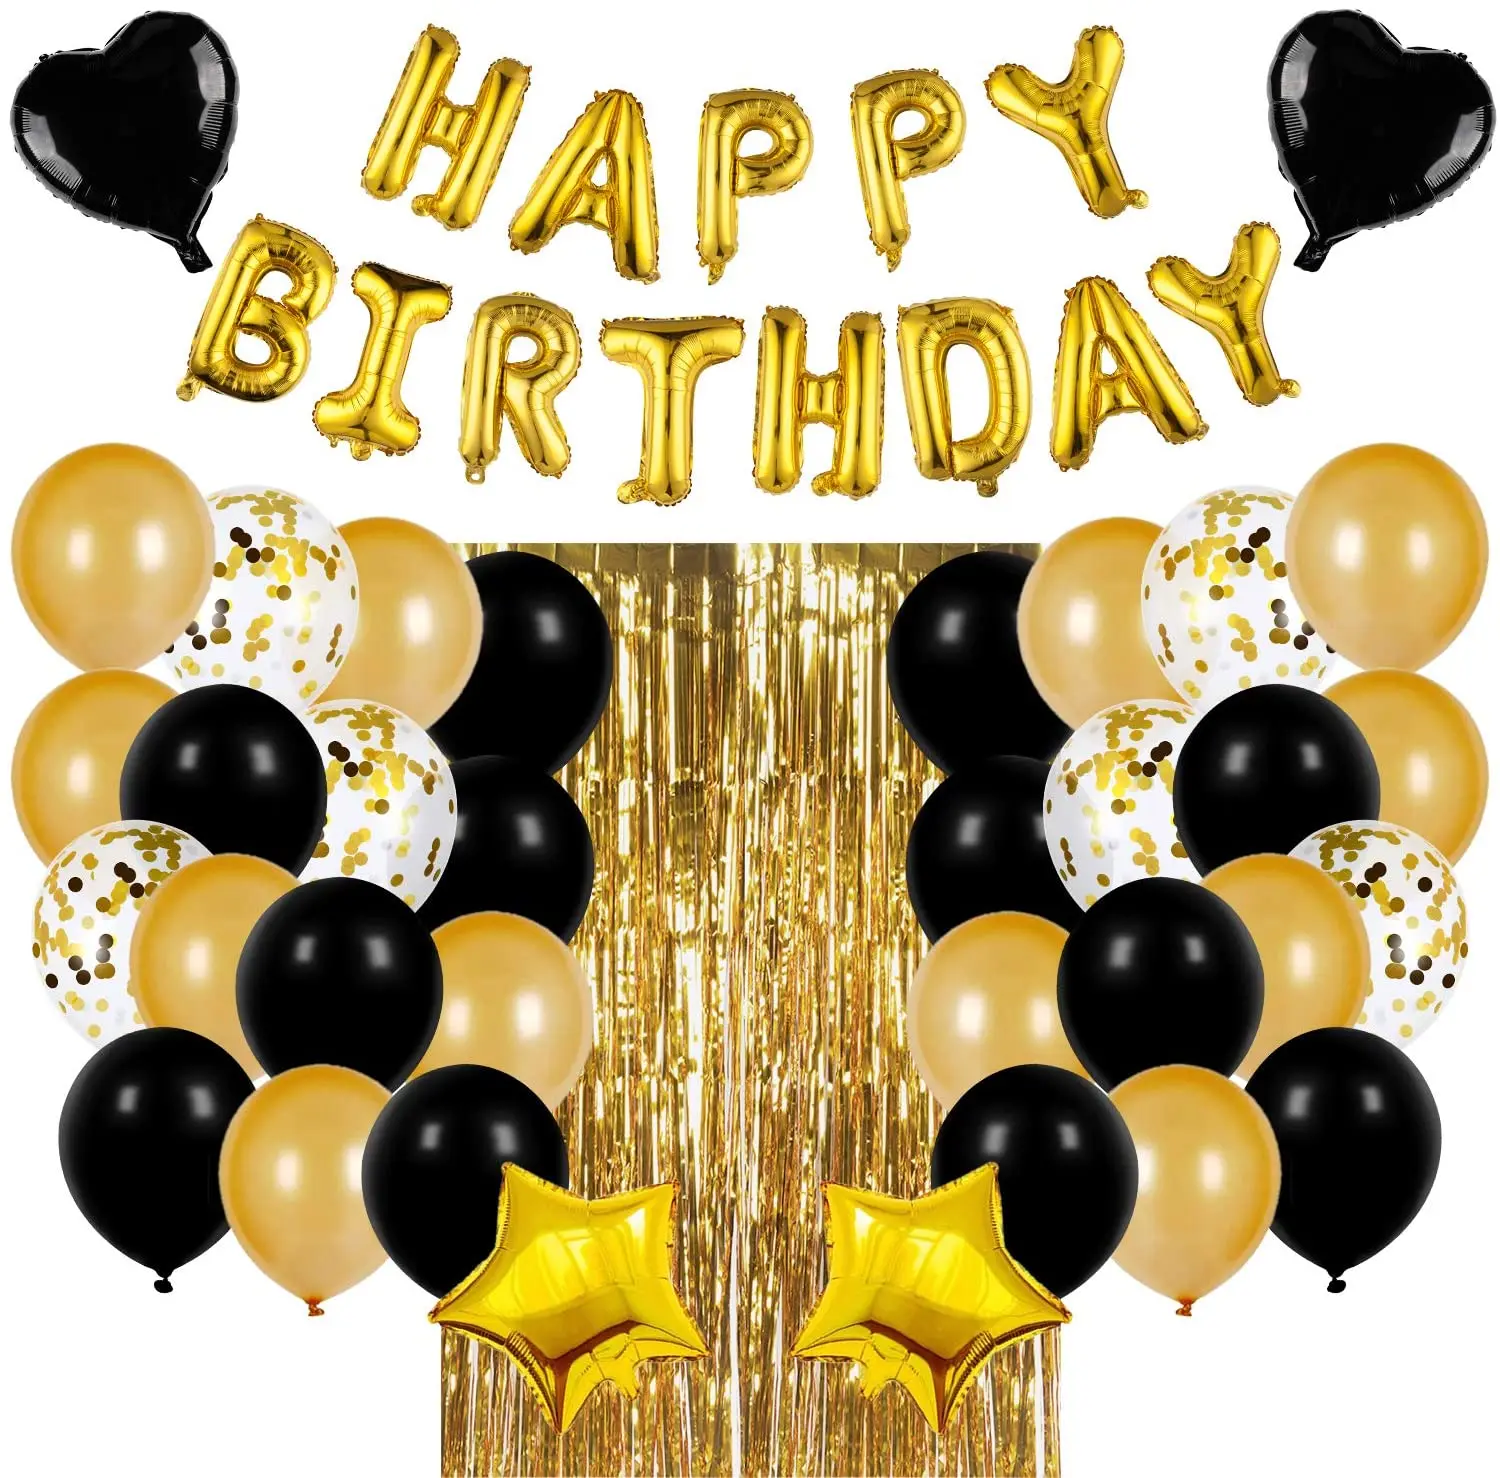 Pafu Gold And Black Birthday Party Supplies Happy Birthday Balloons Banner Confetti Balloons Foil Curtain Birthday Decoration Buy Birthday Decorations Gold And Black Birthday Party Supplies Black And Gold Birthday Party Decorations Set